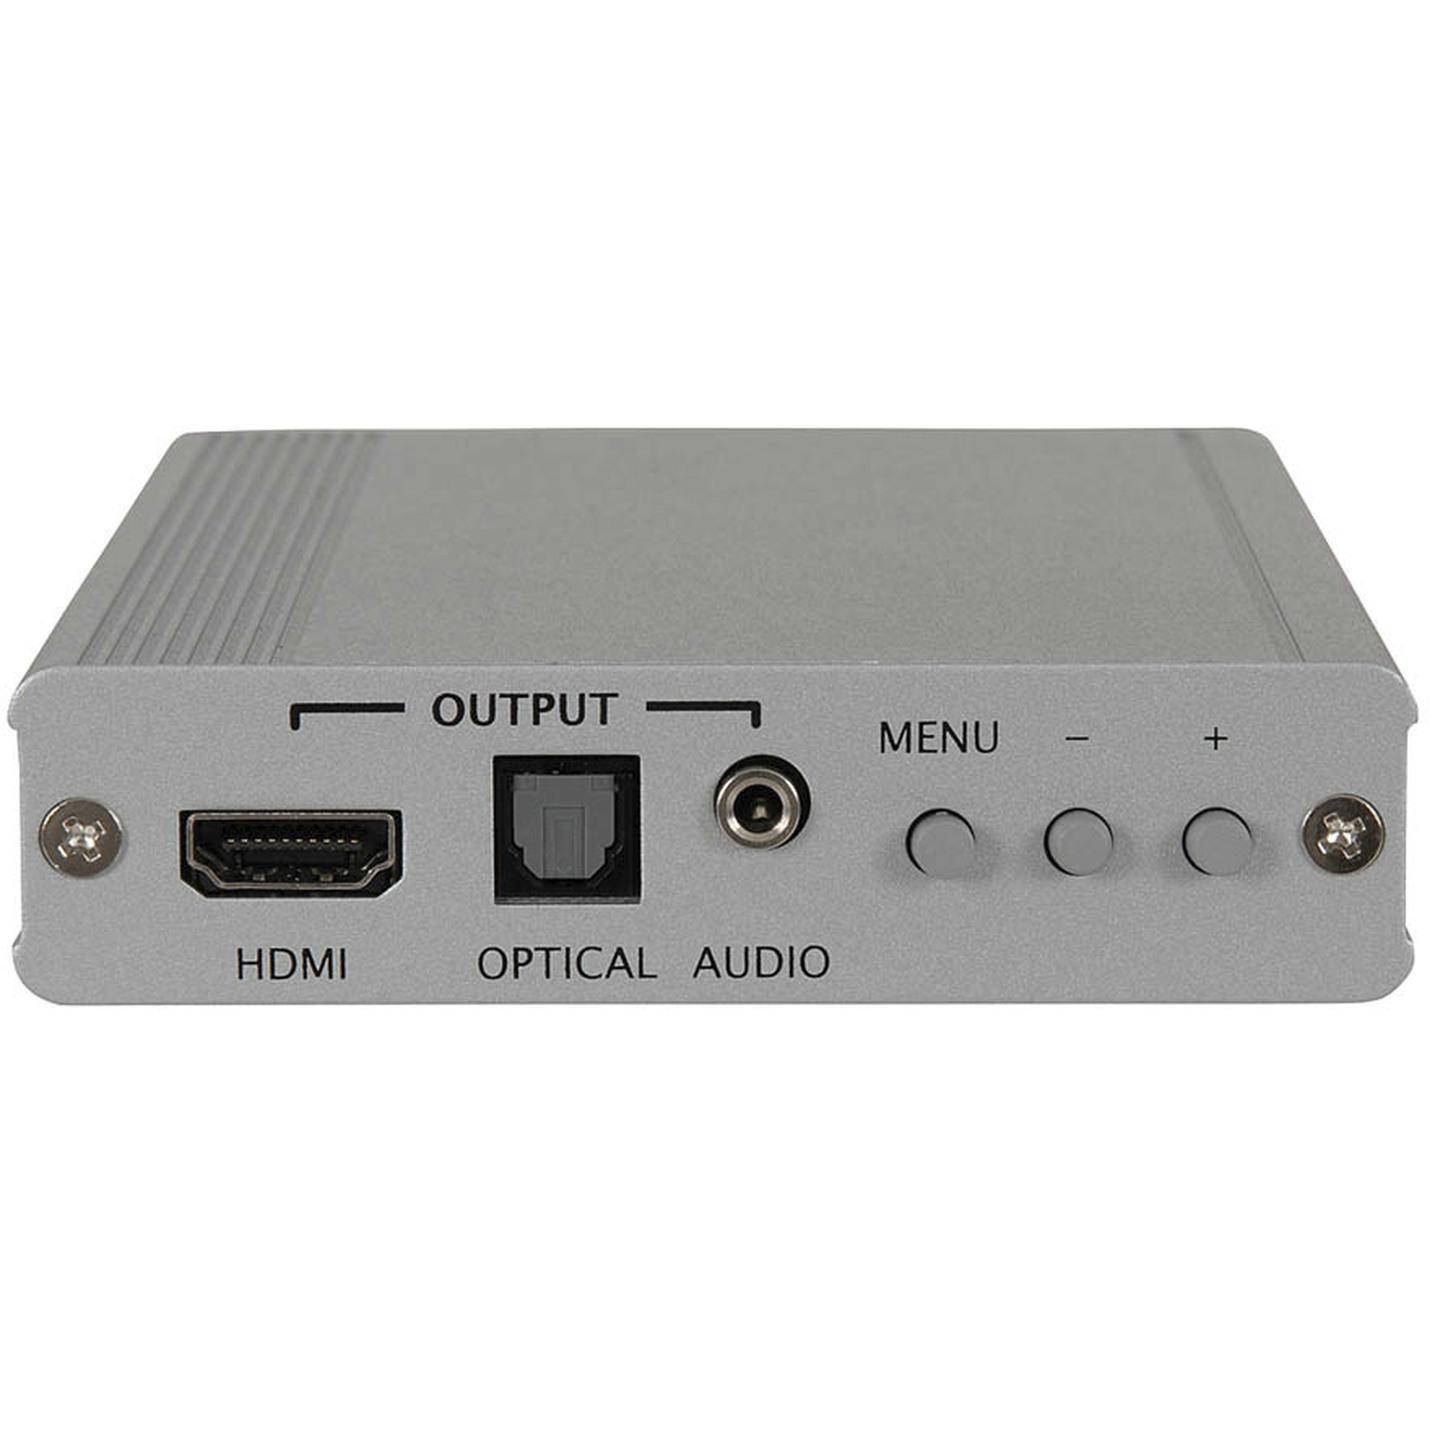 Component and Digital/Analogue Audio to HDMI Upscaler